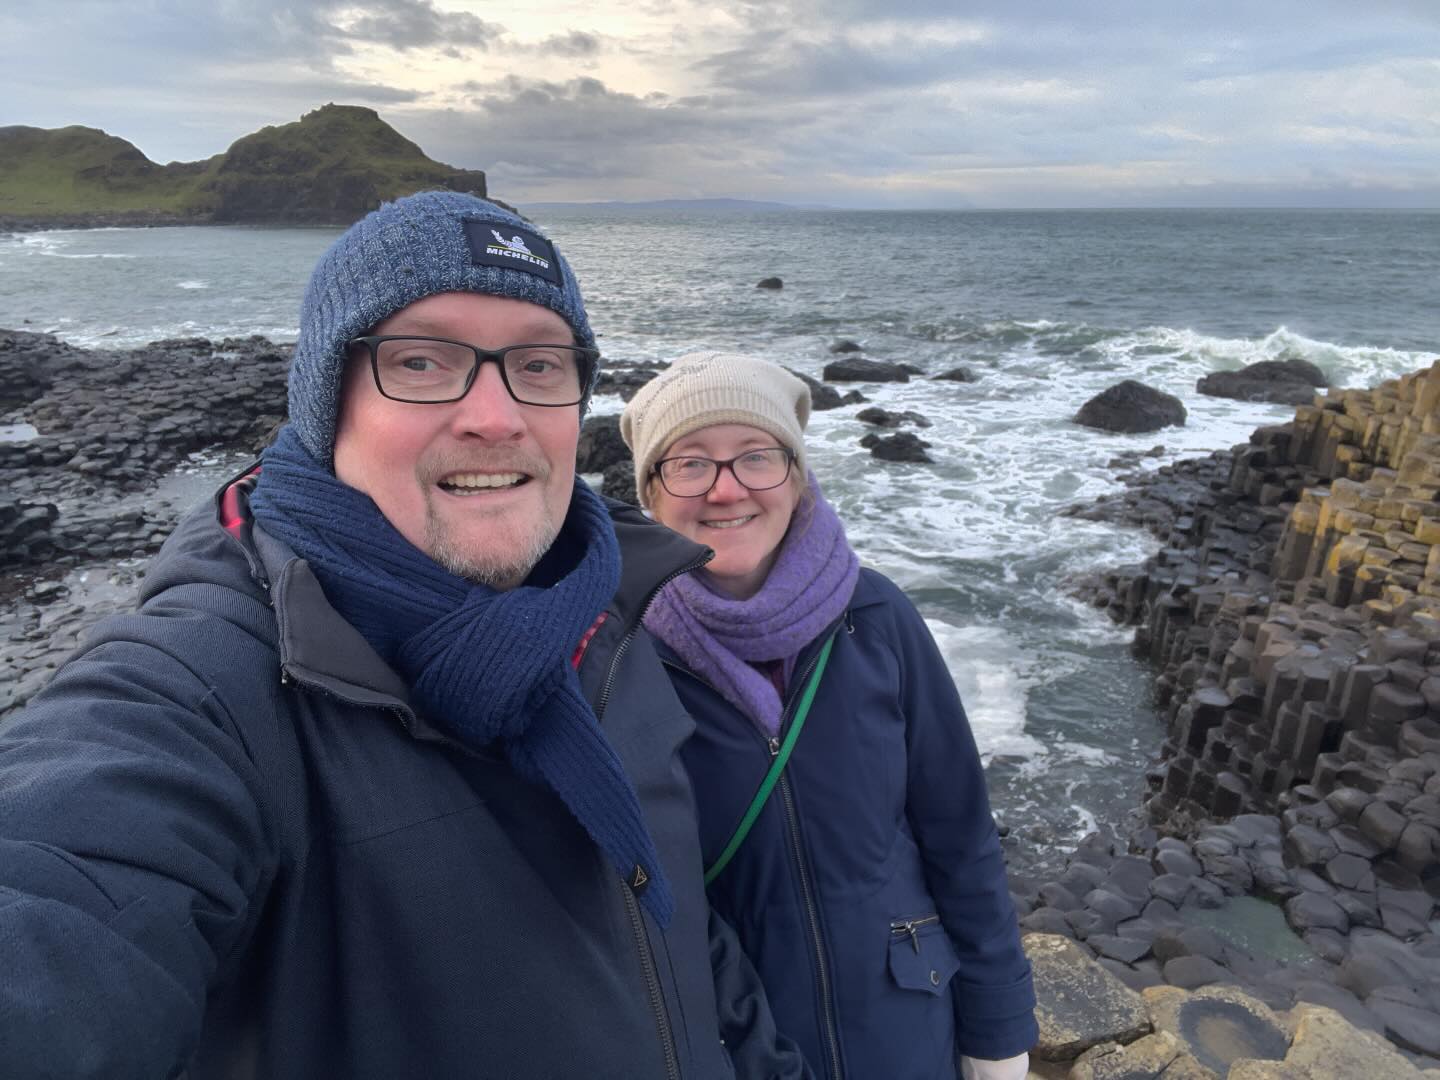 Post Xmas night away on the causeway coast. 2nd time lucky for mar finally getting to the giants causeway and it not being torrential rain